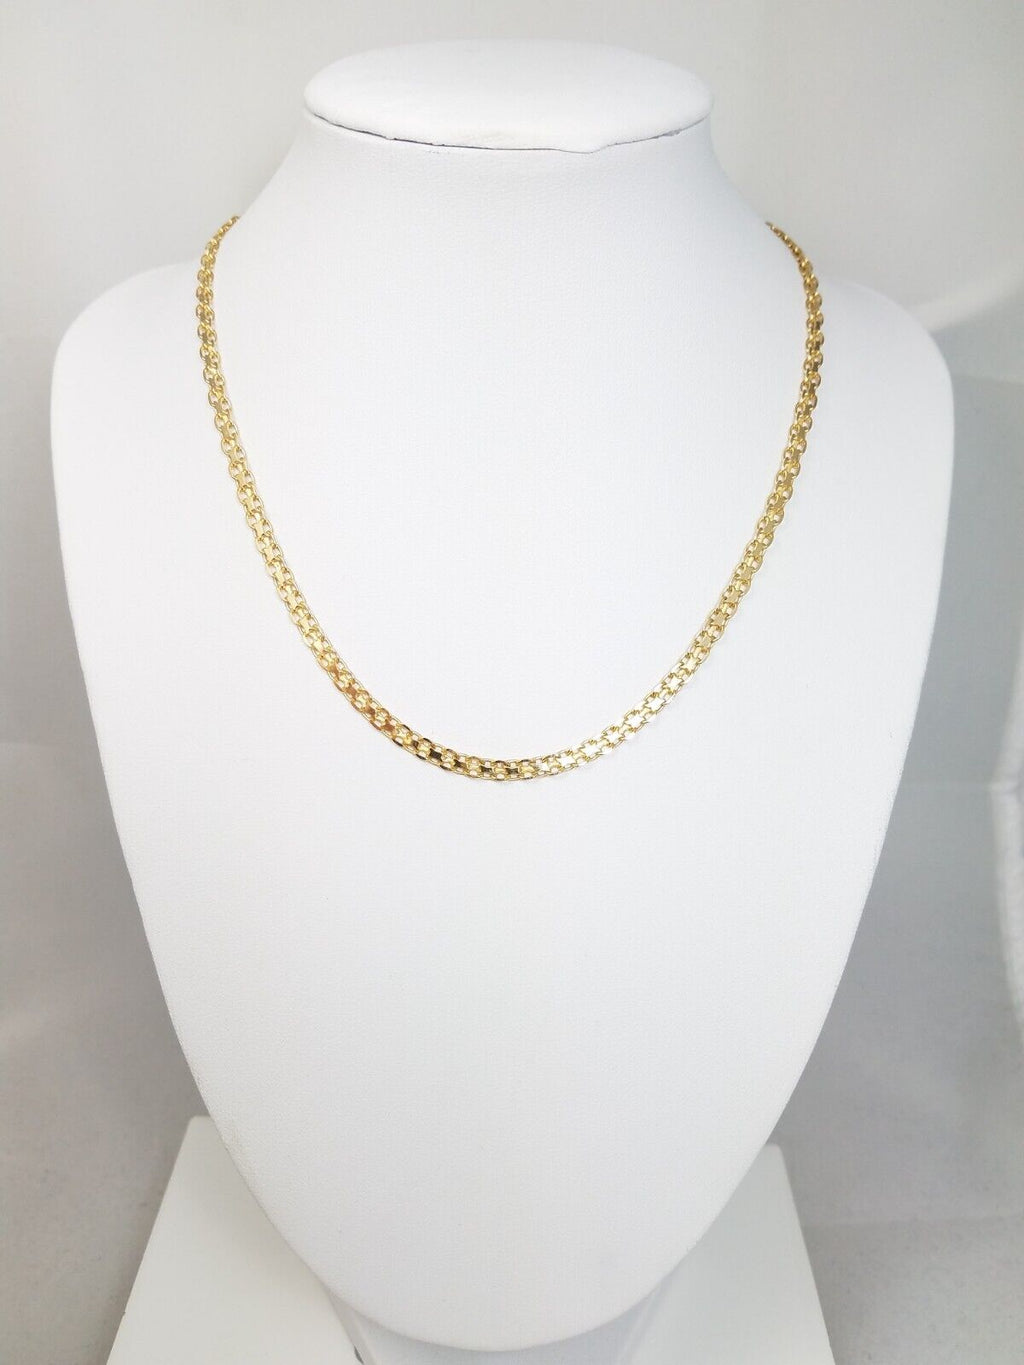 16" 18k Solid Yellow Gold Bismark Link Chain Necklace Italy